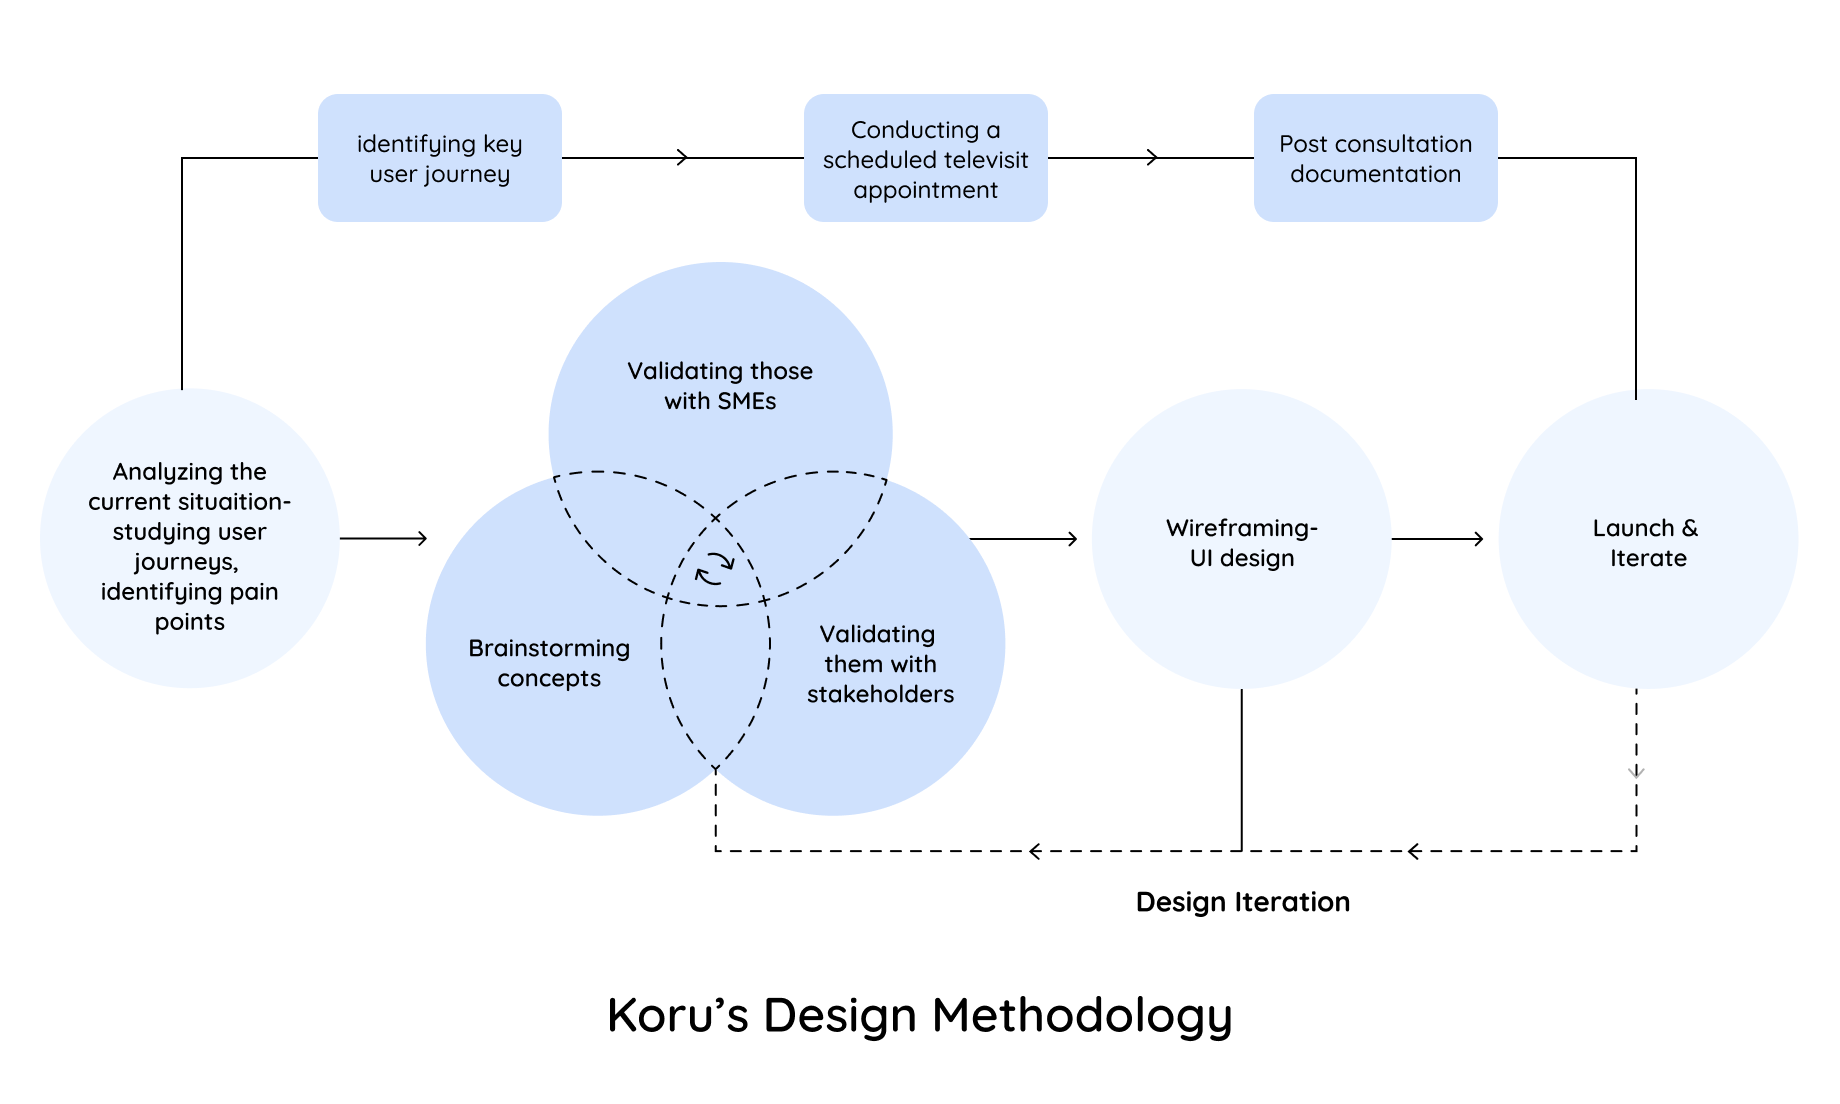 The MVP is an iterative UX strategy based on feedback loops to address user needs